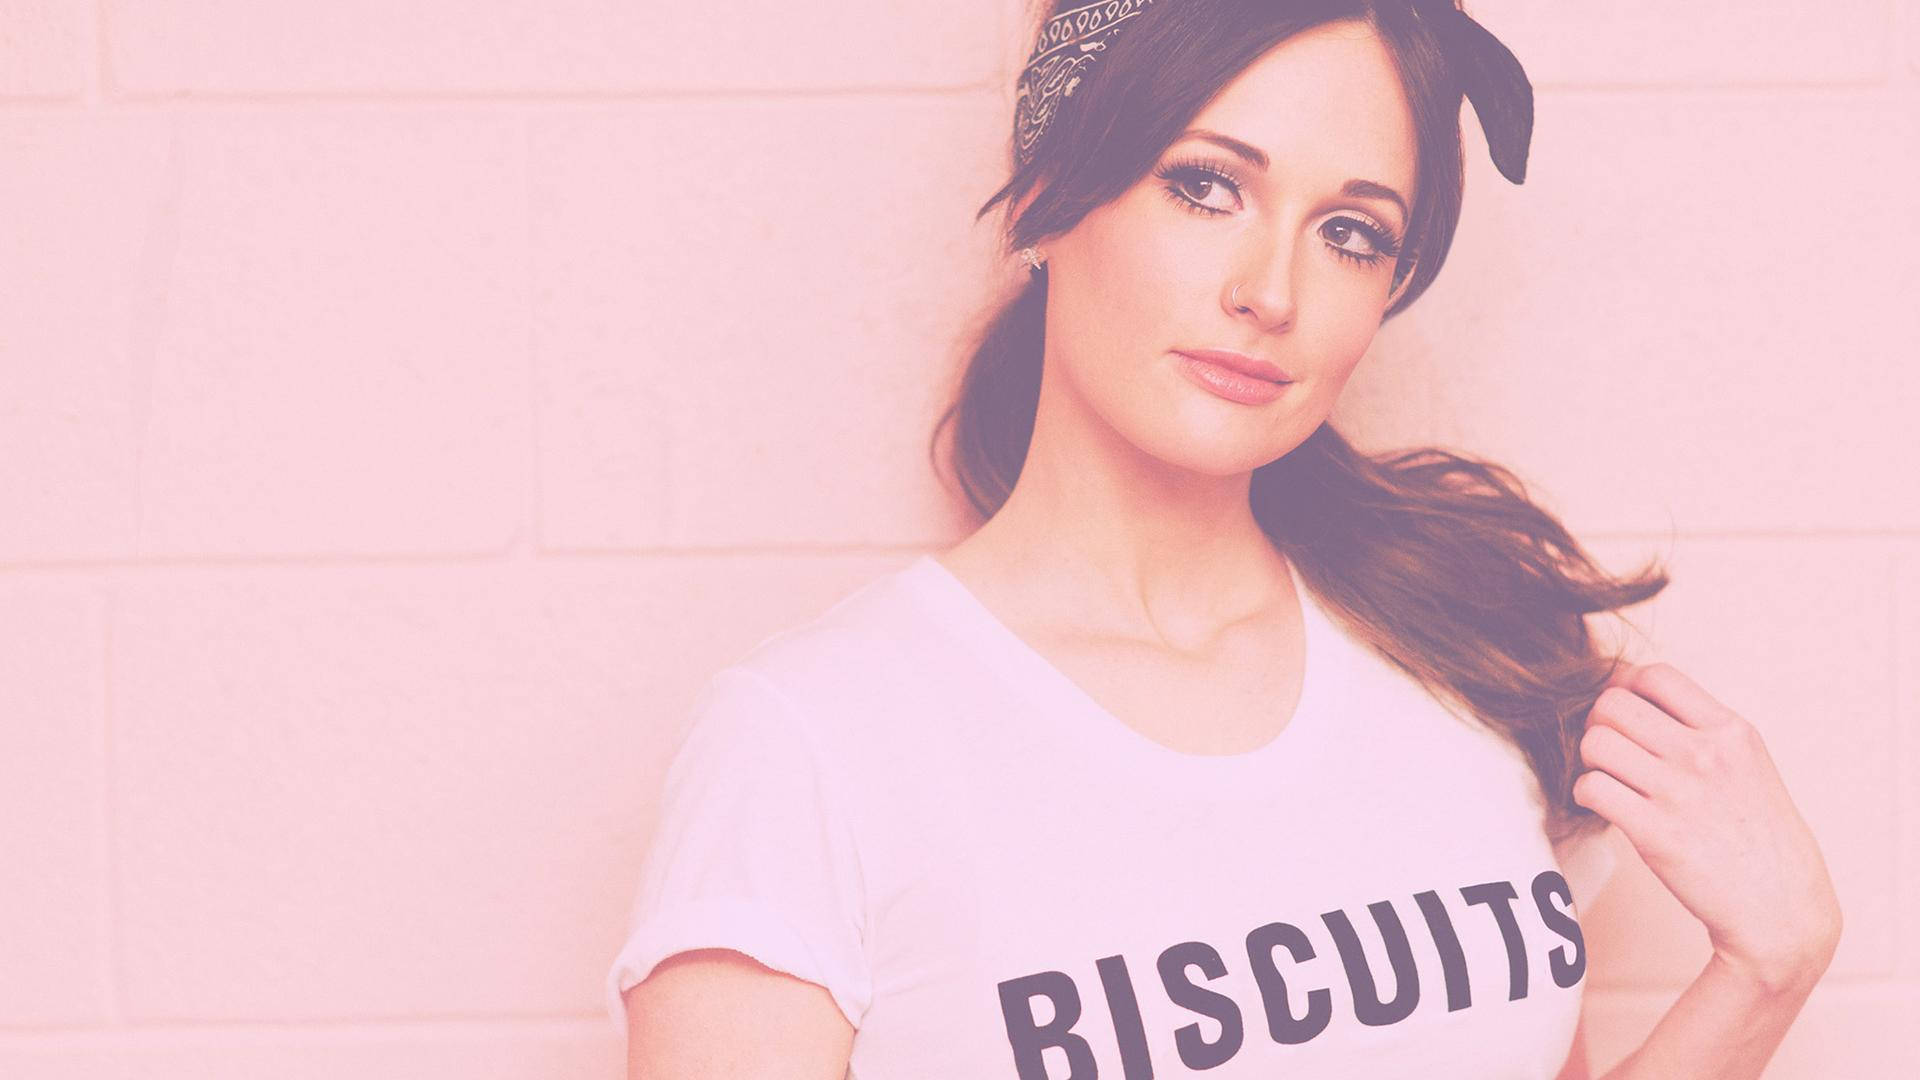 Kacey Musgraves Pastel Pink Aesthetic Background